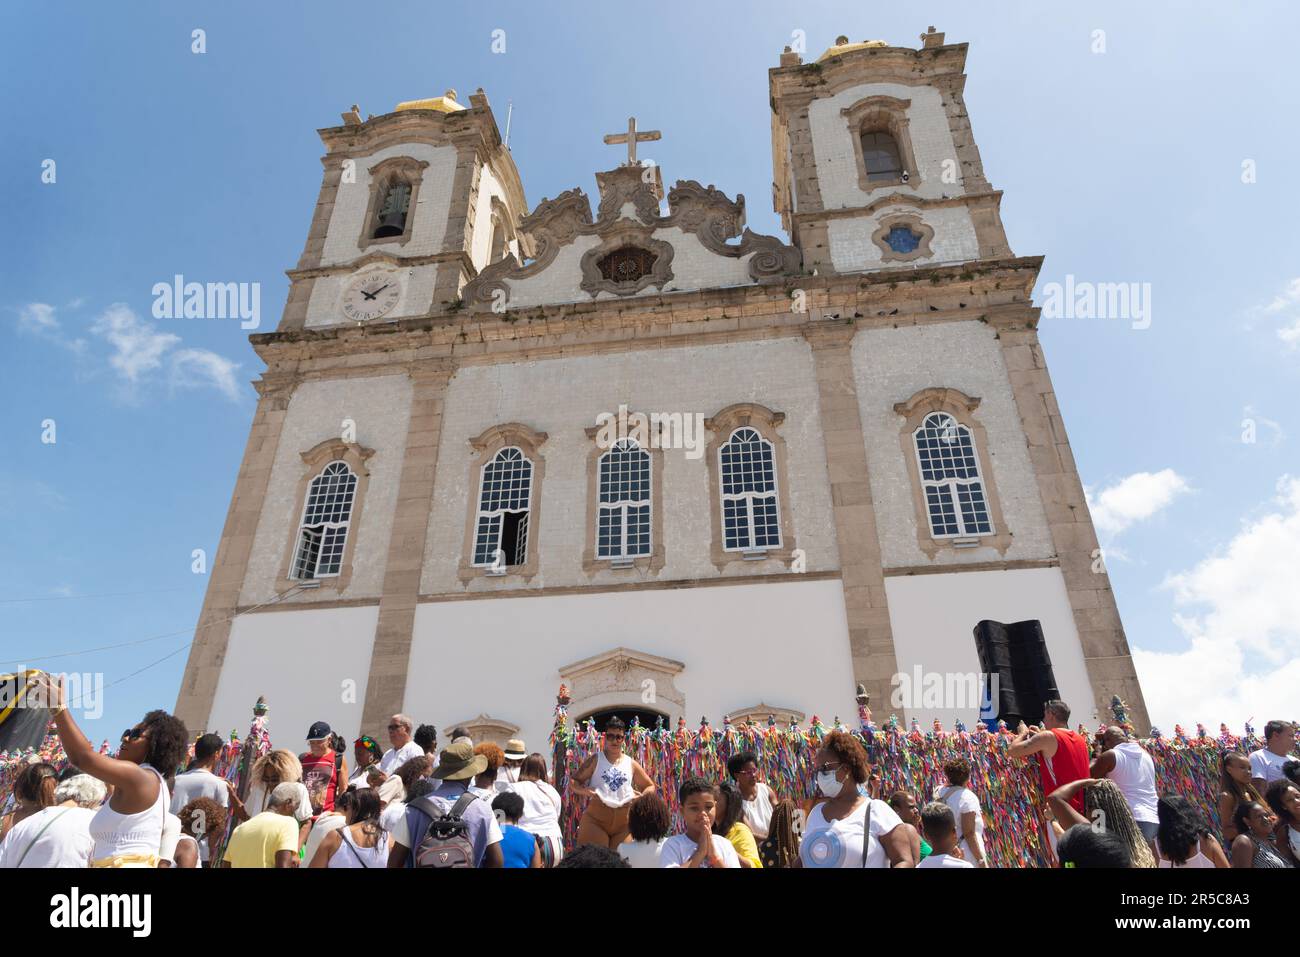 An old European style church with ornamental architecture painted in white stands tall and proud in front of a large crowd of onlookers Stock Photo